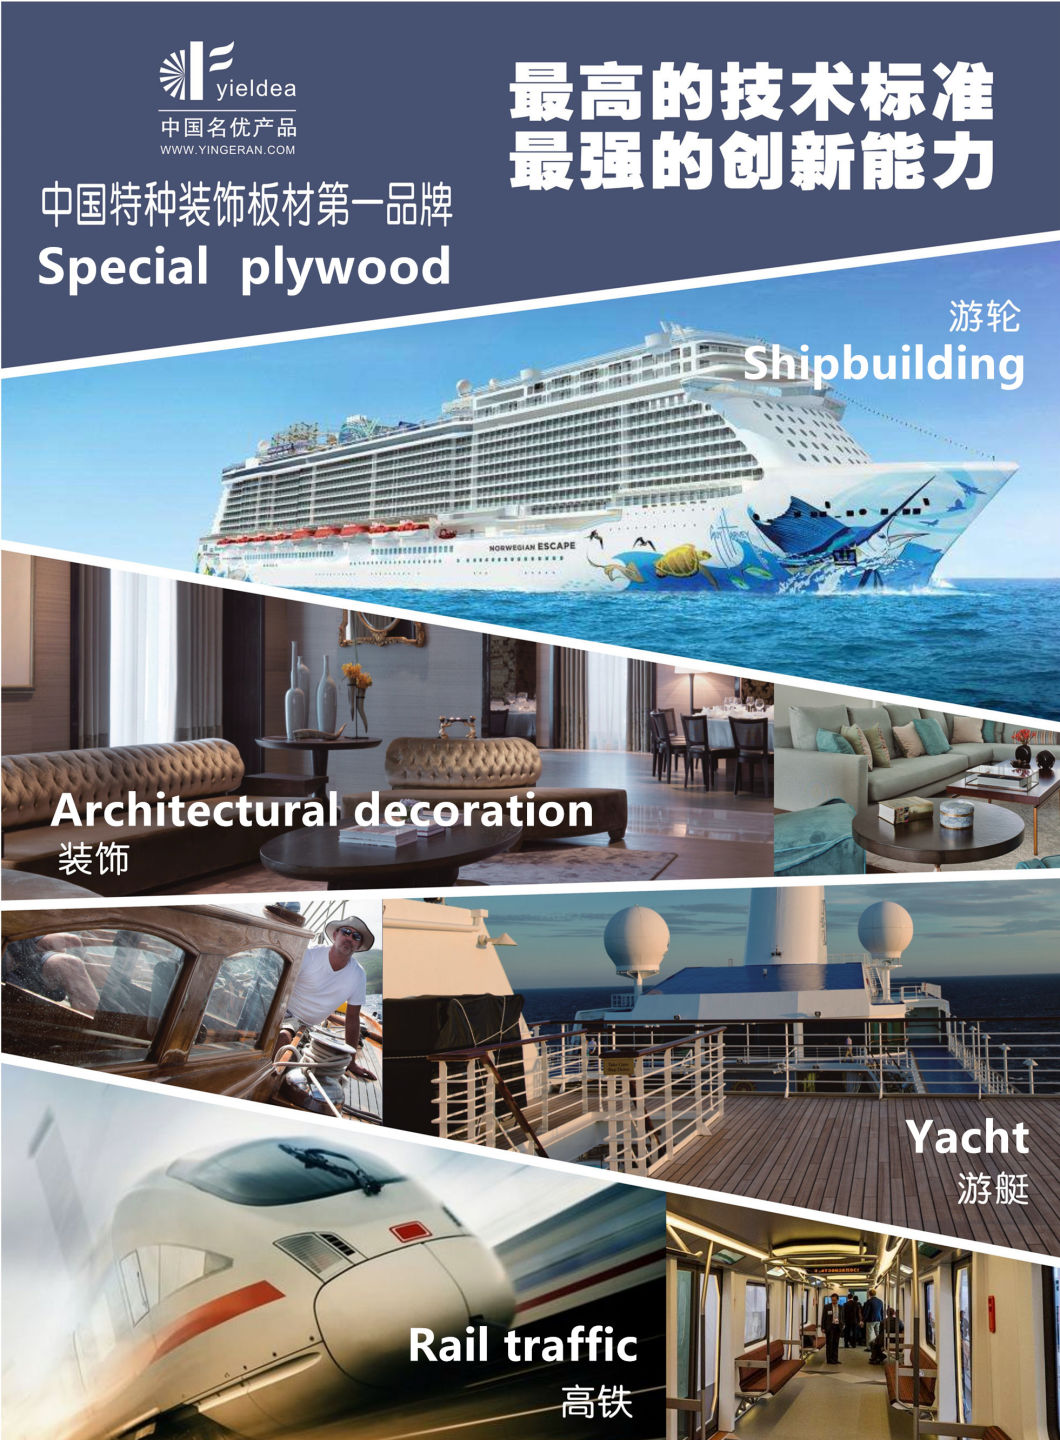 Marine Plywood/ Anti-Corrosive, Waterproof/ Outdoor Garden Constructure, Swimming Pool/Offshore Platform, Yachts, Cruiser/ High-End Hotel Decoration, Furniture